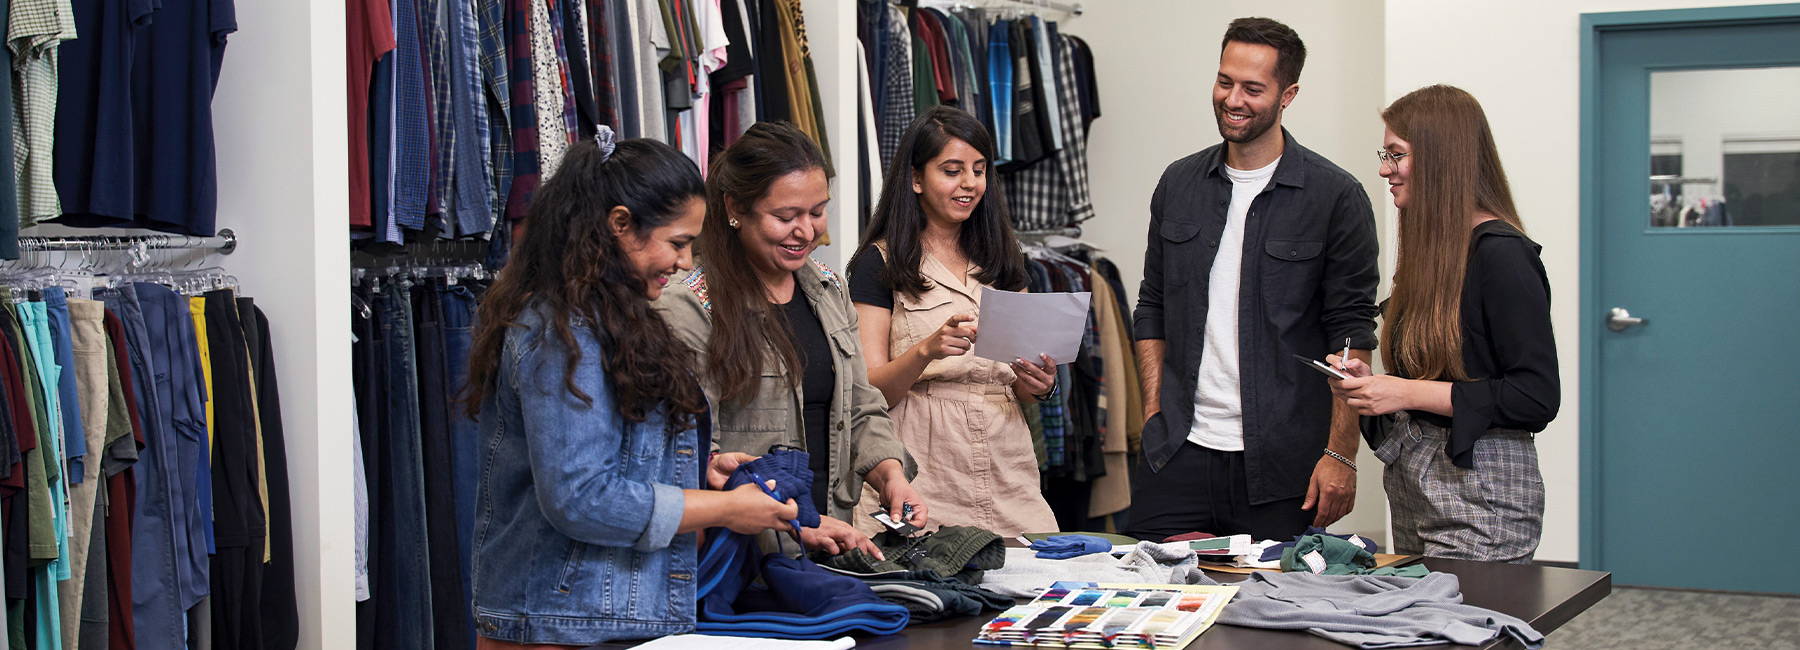 Team members standing around a table looking at clothing swatches